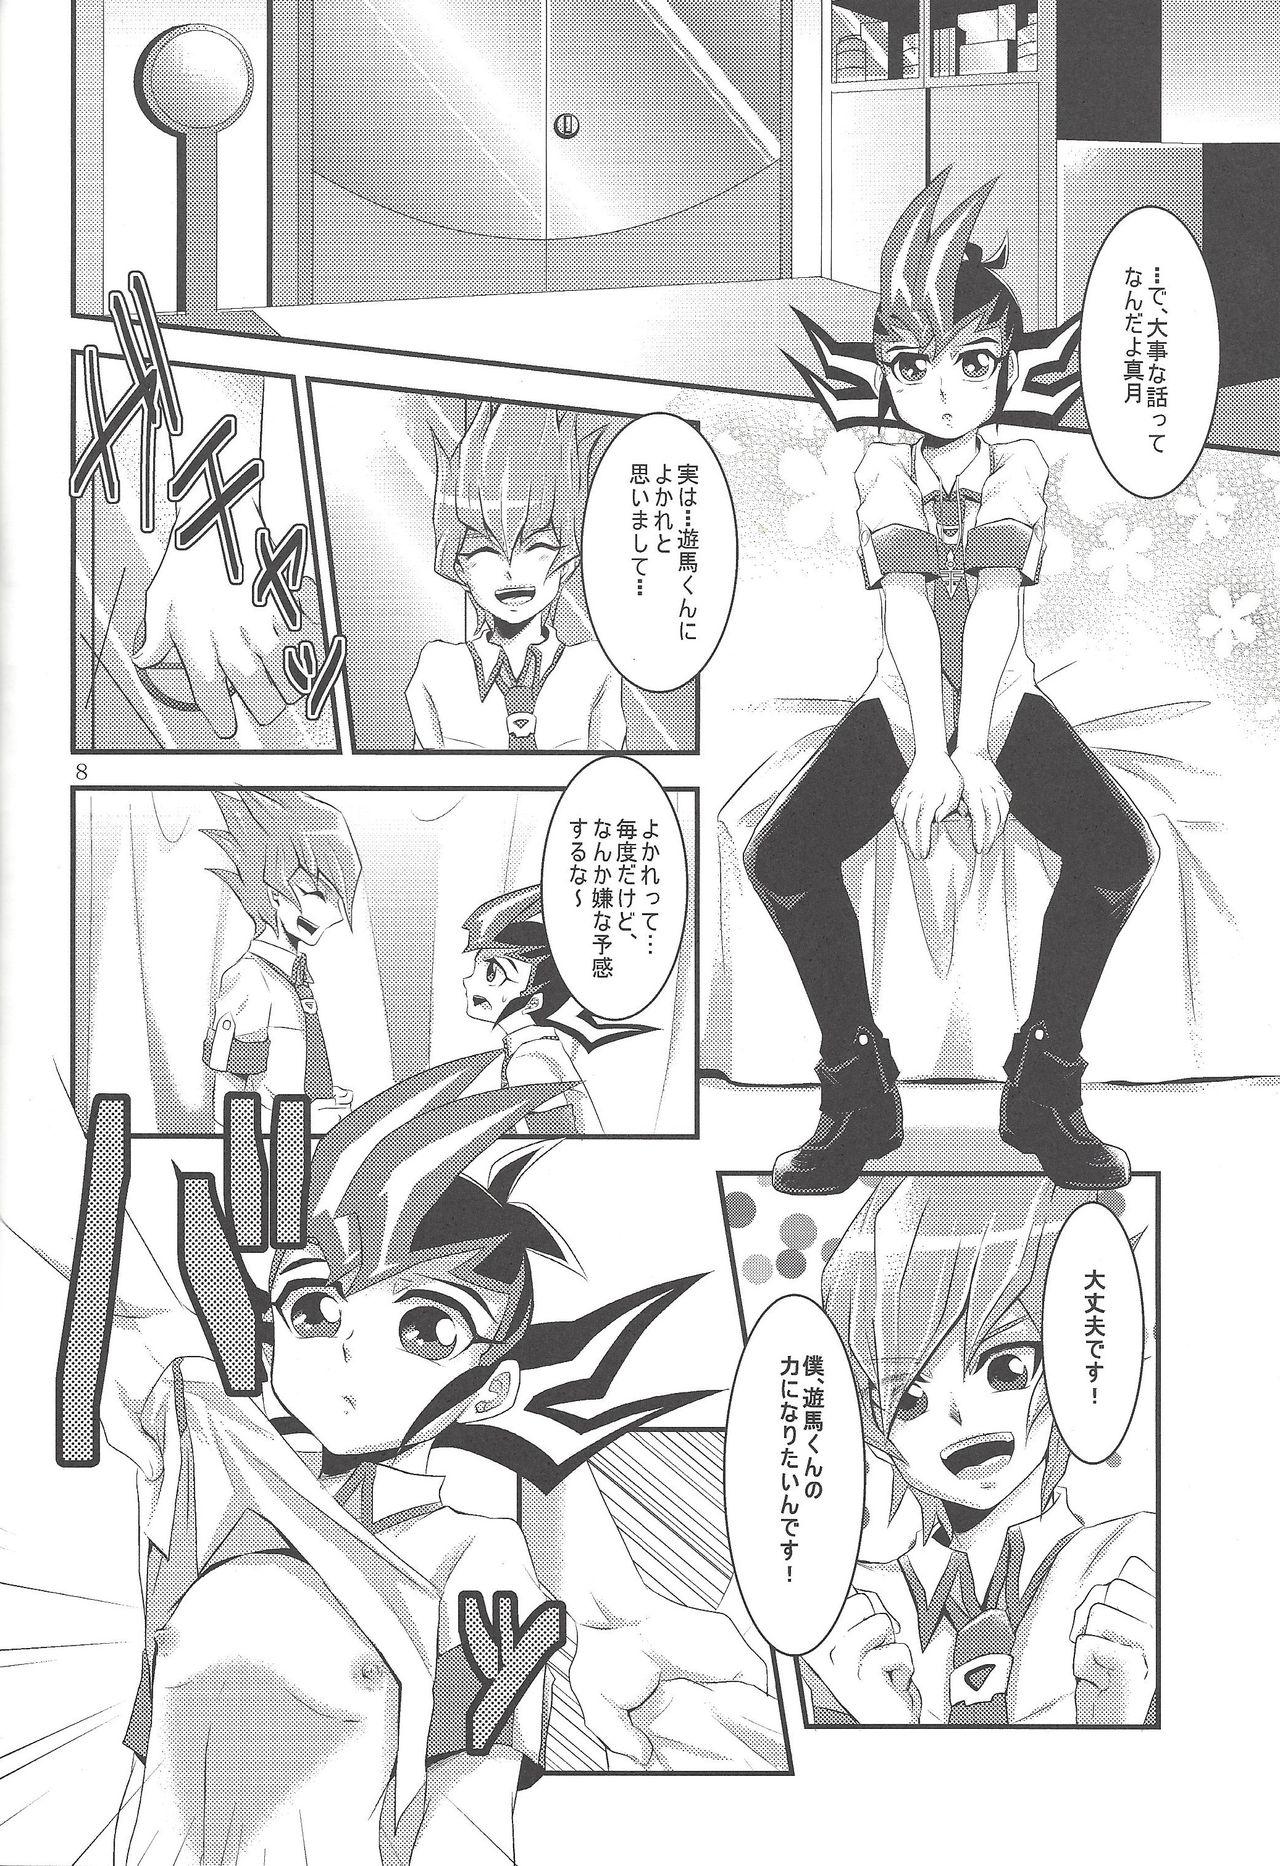 Cute Yokare to Omotte - Yu gi oh zexal Pussy Licking - Page 7